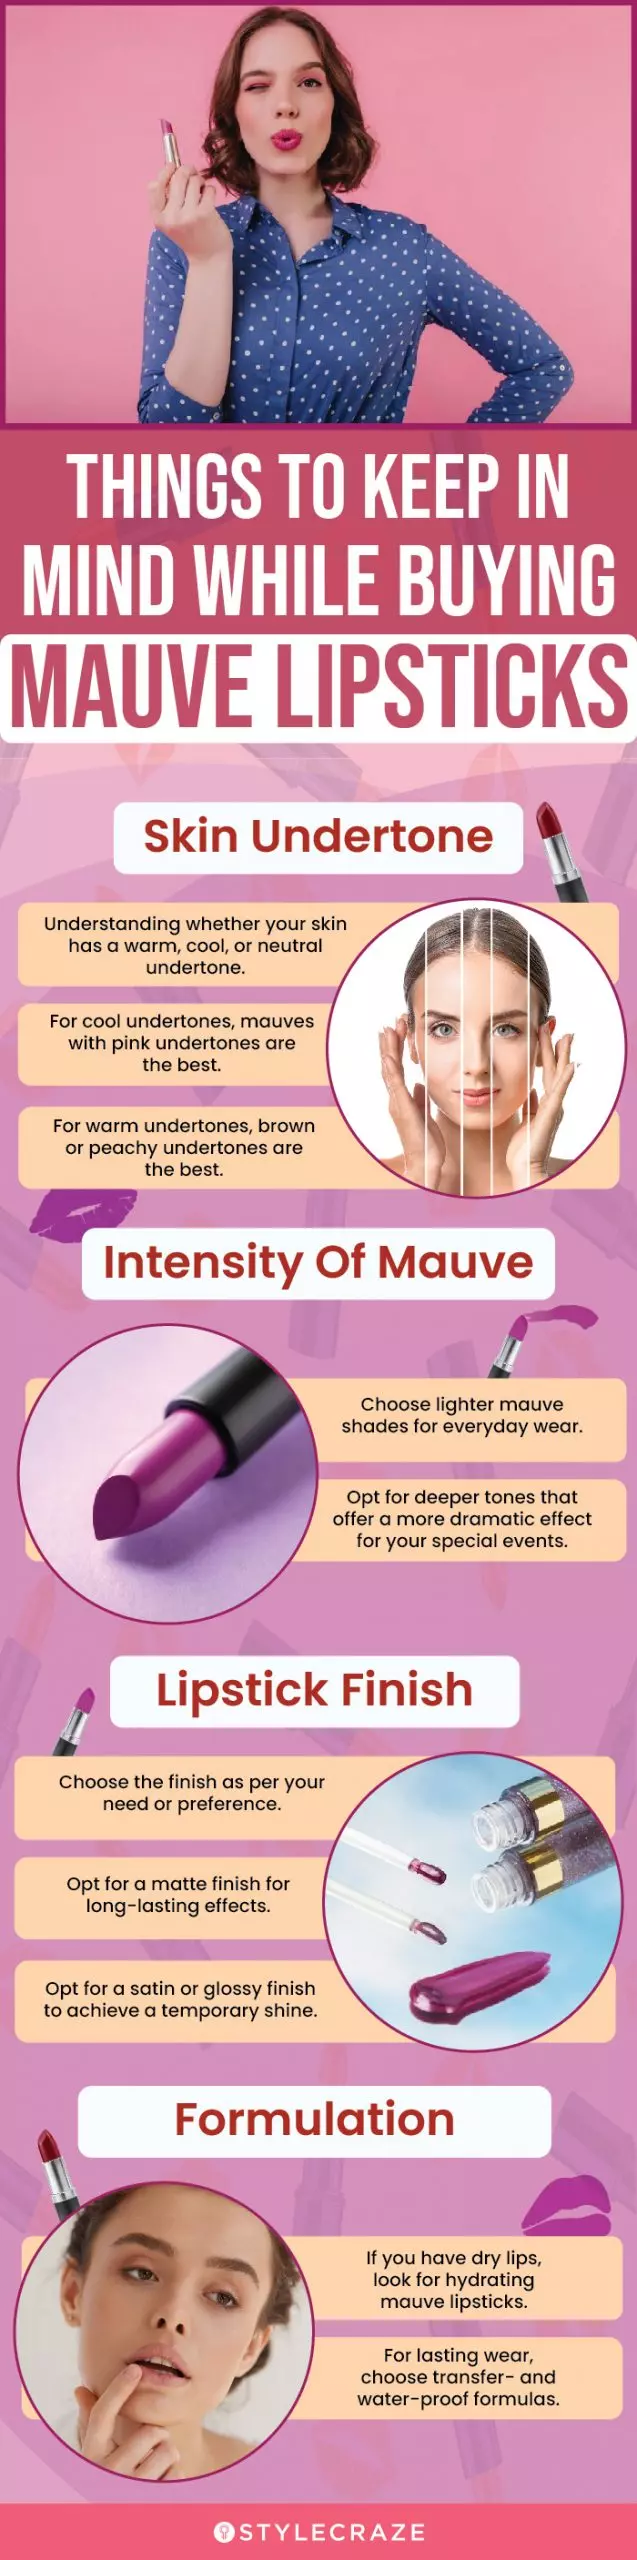 Things To Keep In Mind While Buying Mauve Lipsticks (infographic)